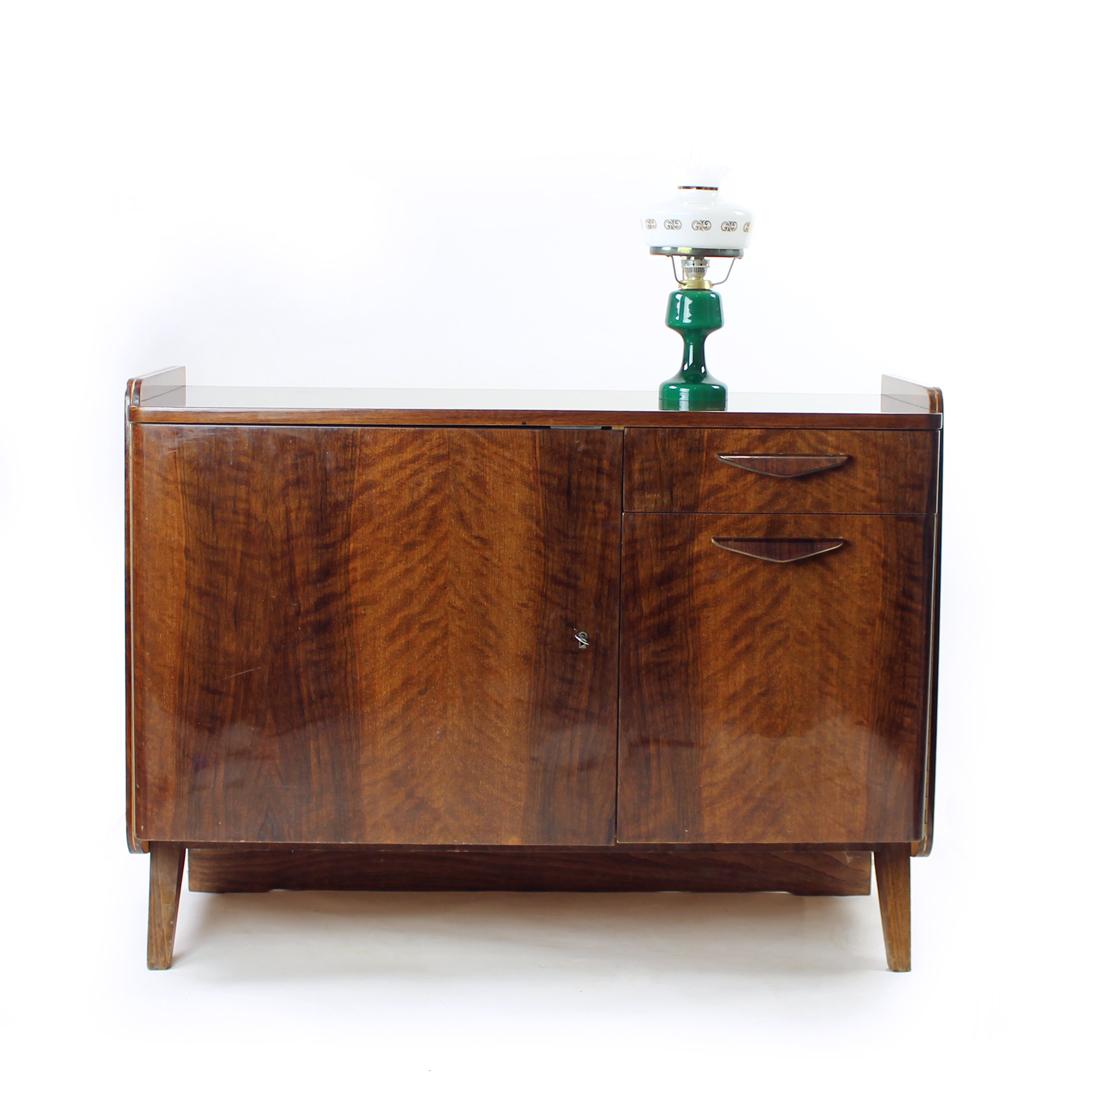 Beautiful midcentury sideboard in a dark walnut wood veneer. Produced by Tatra company in Czechoslovakia. Original label still partially attached on the back with the year of the production visible. The sideboard stands as a solid and beautiful